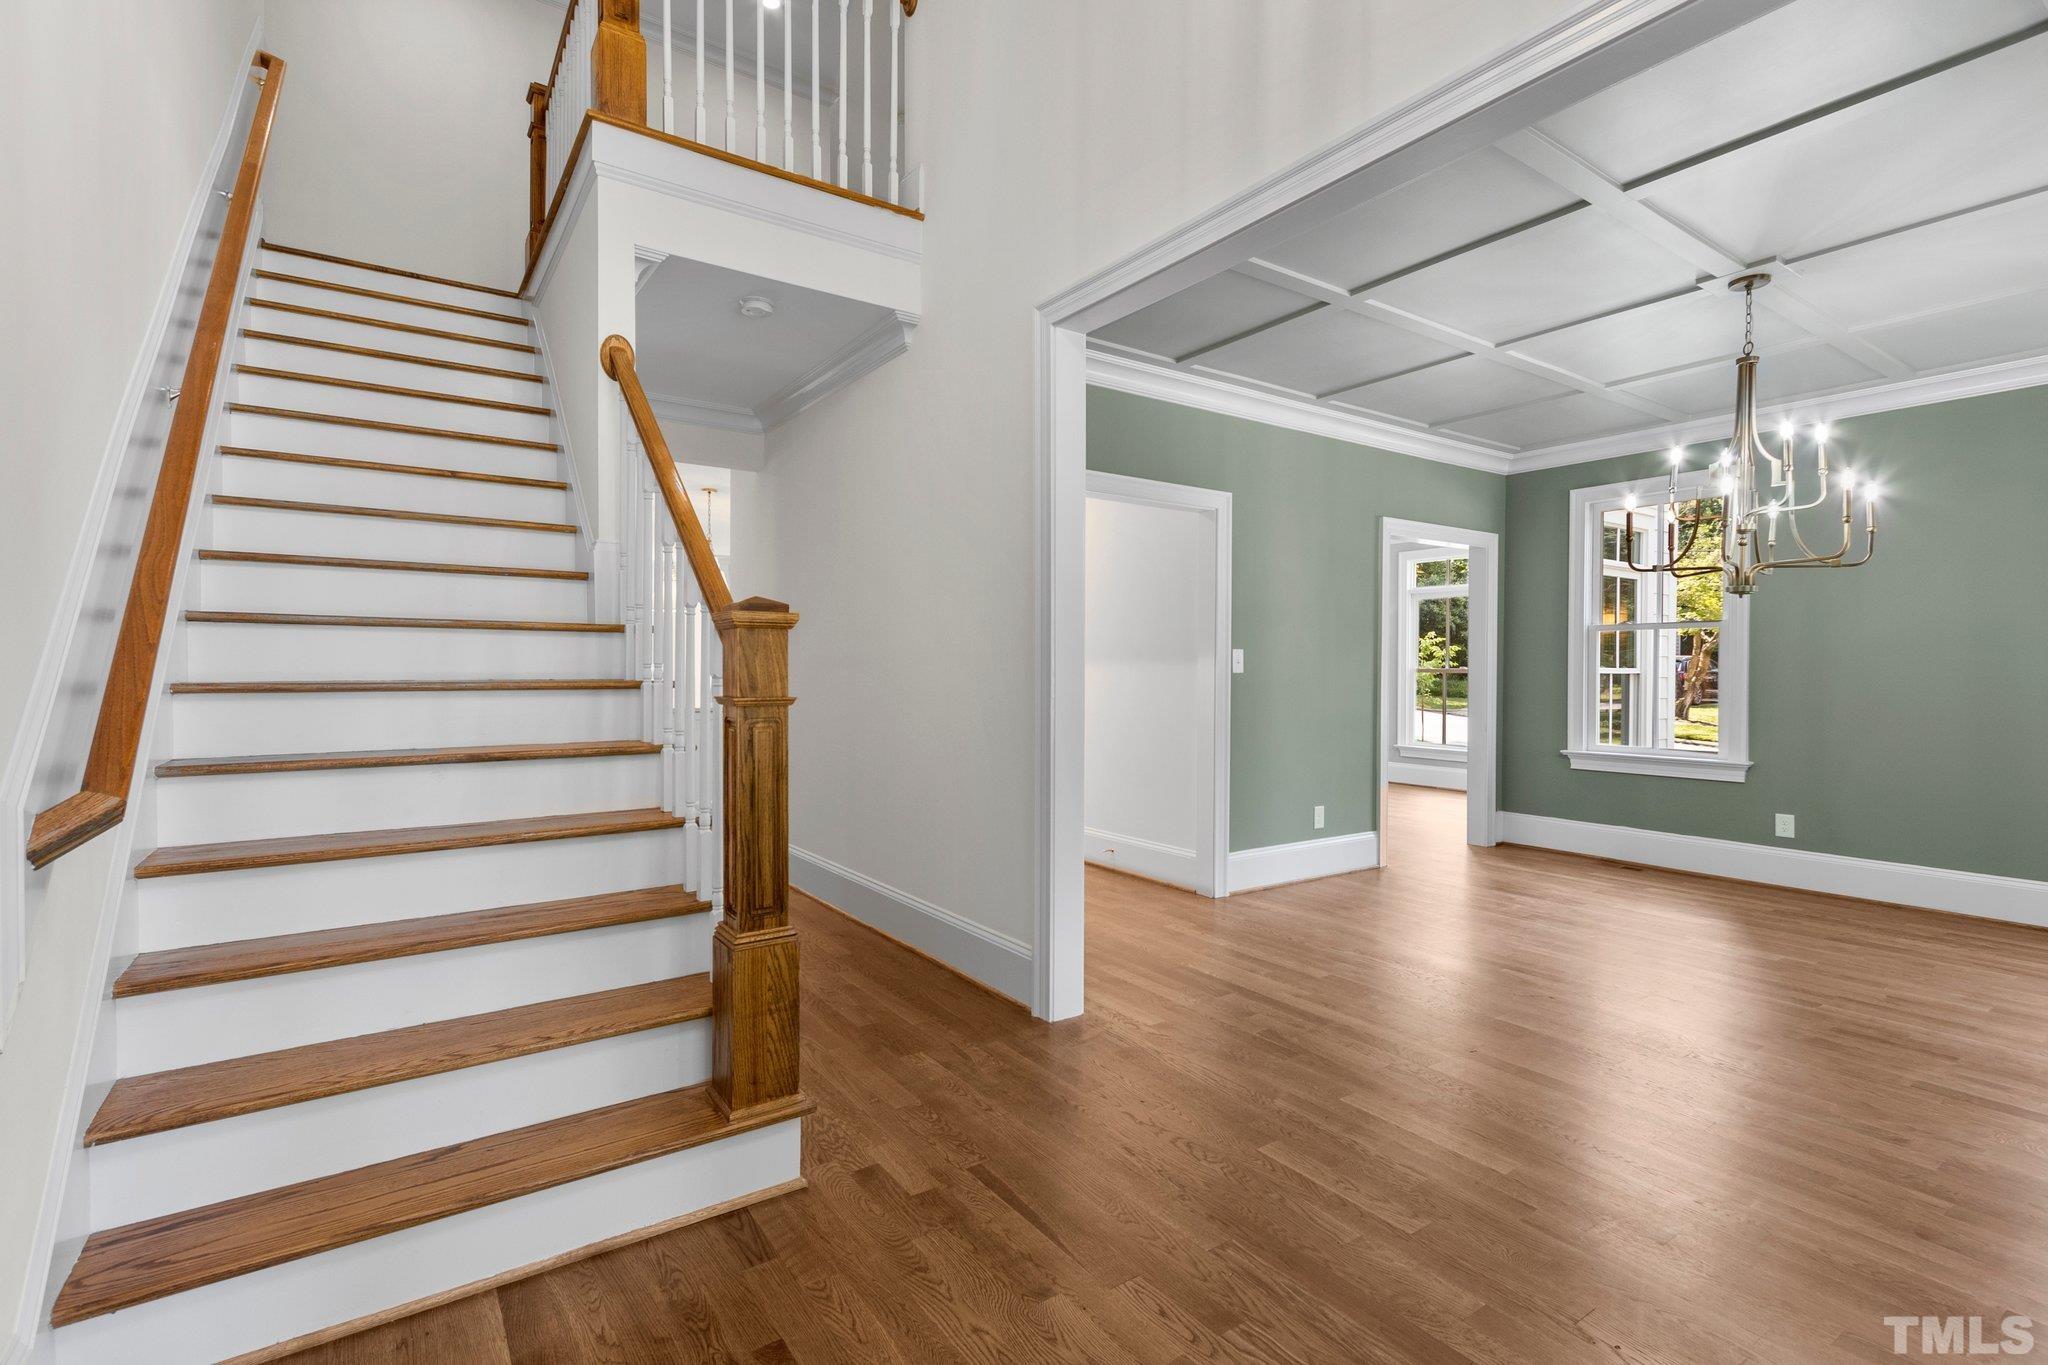 Welcome! Foyer through the front door. Dining room to your right and bedroom 4 or study to your left. Featuring hardwood floors and extensive crown molding throughout 1st floor.